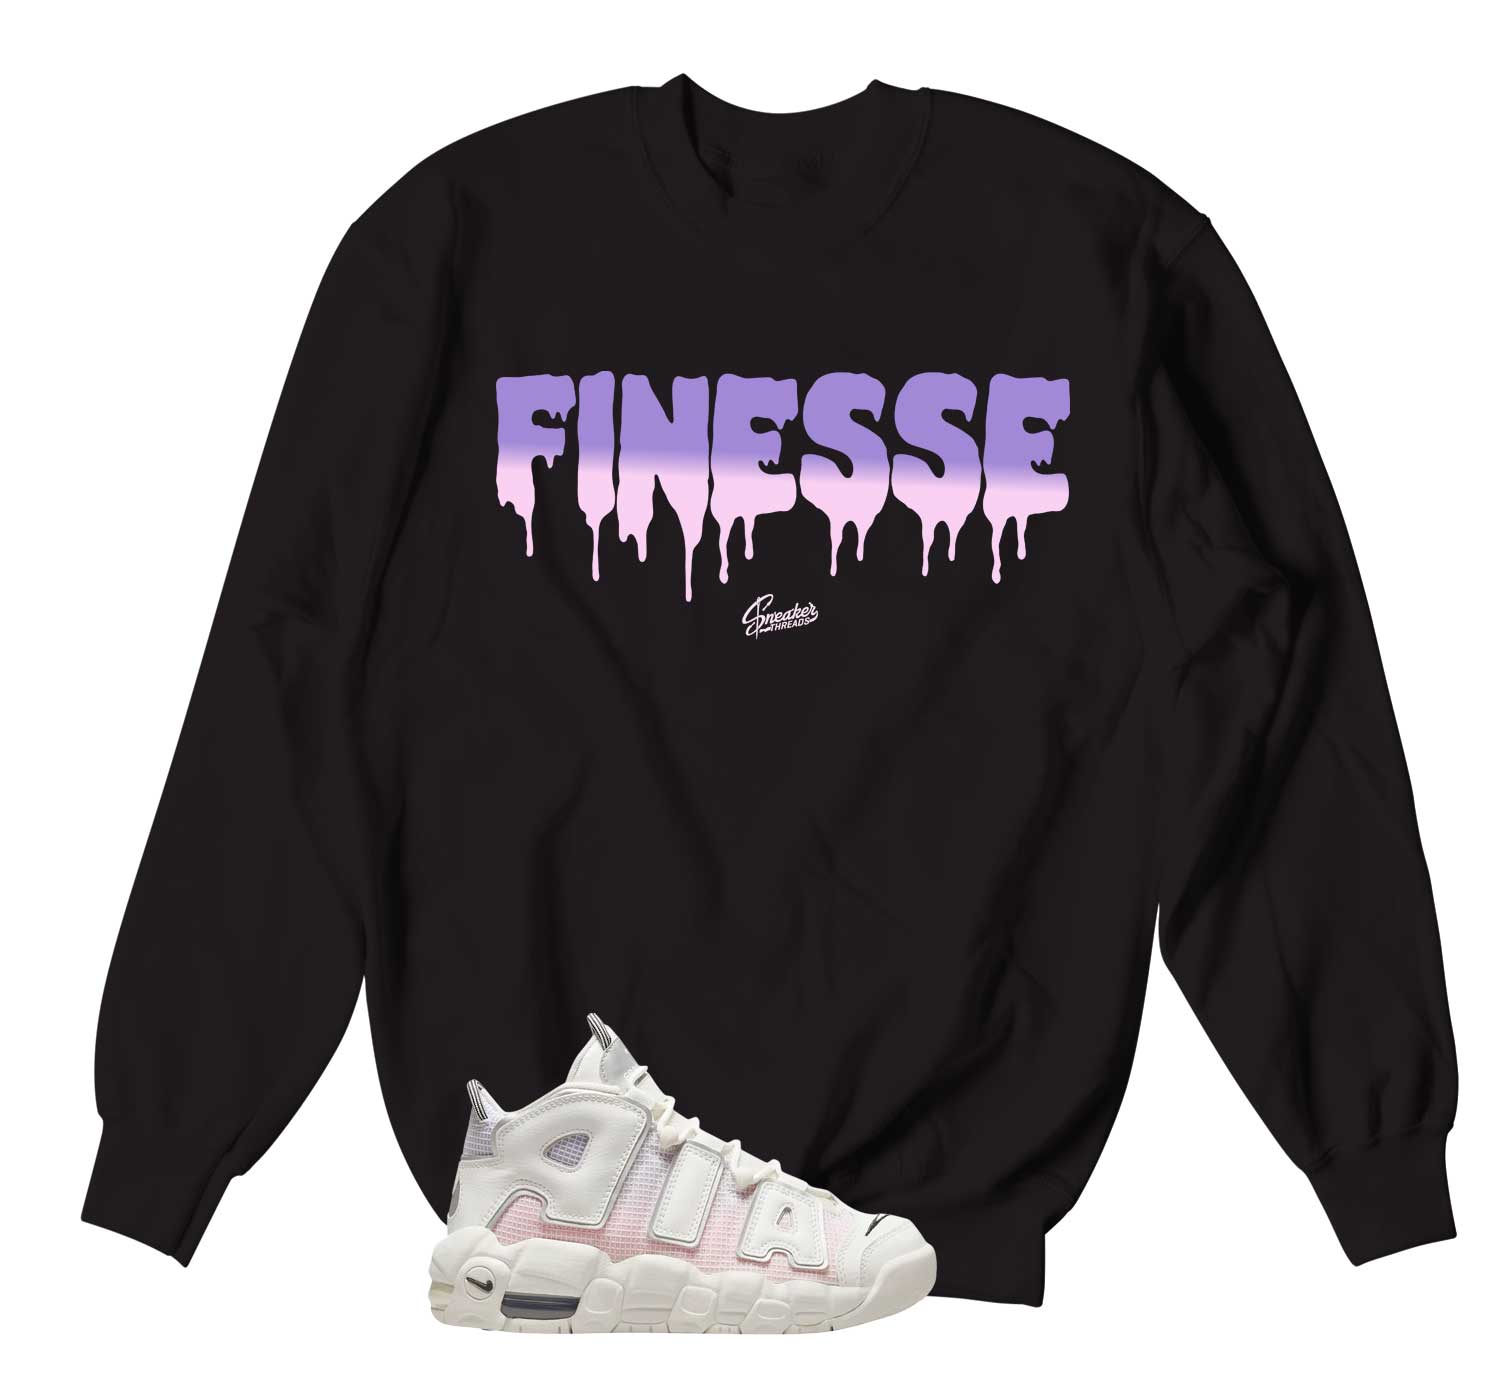 Uptempo 96 Thank You Wilson Sweater - Finesse - Black